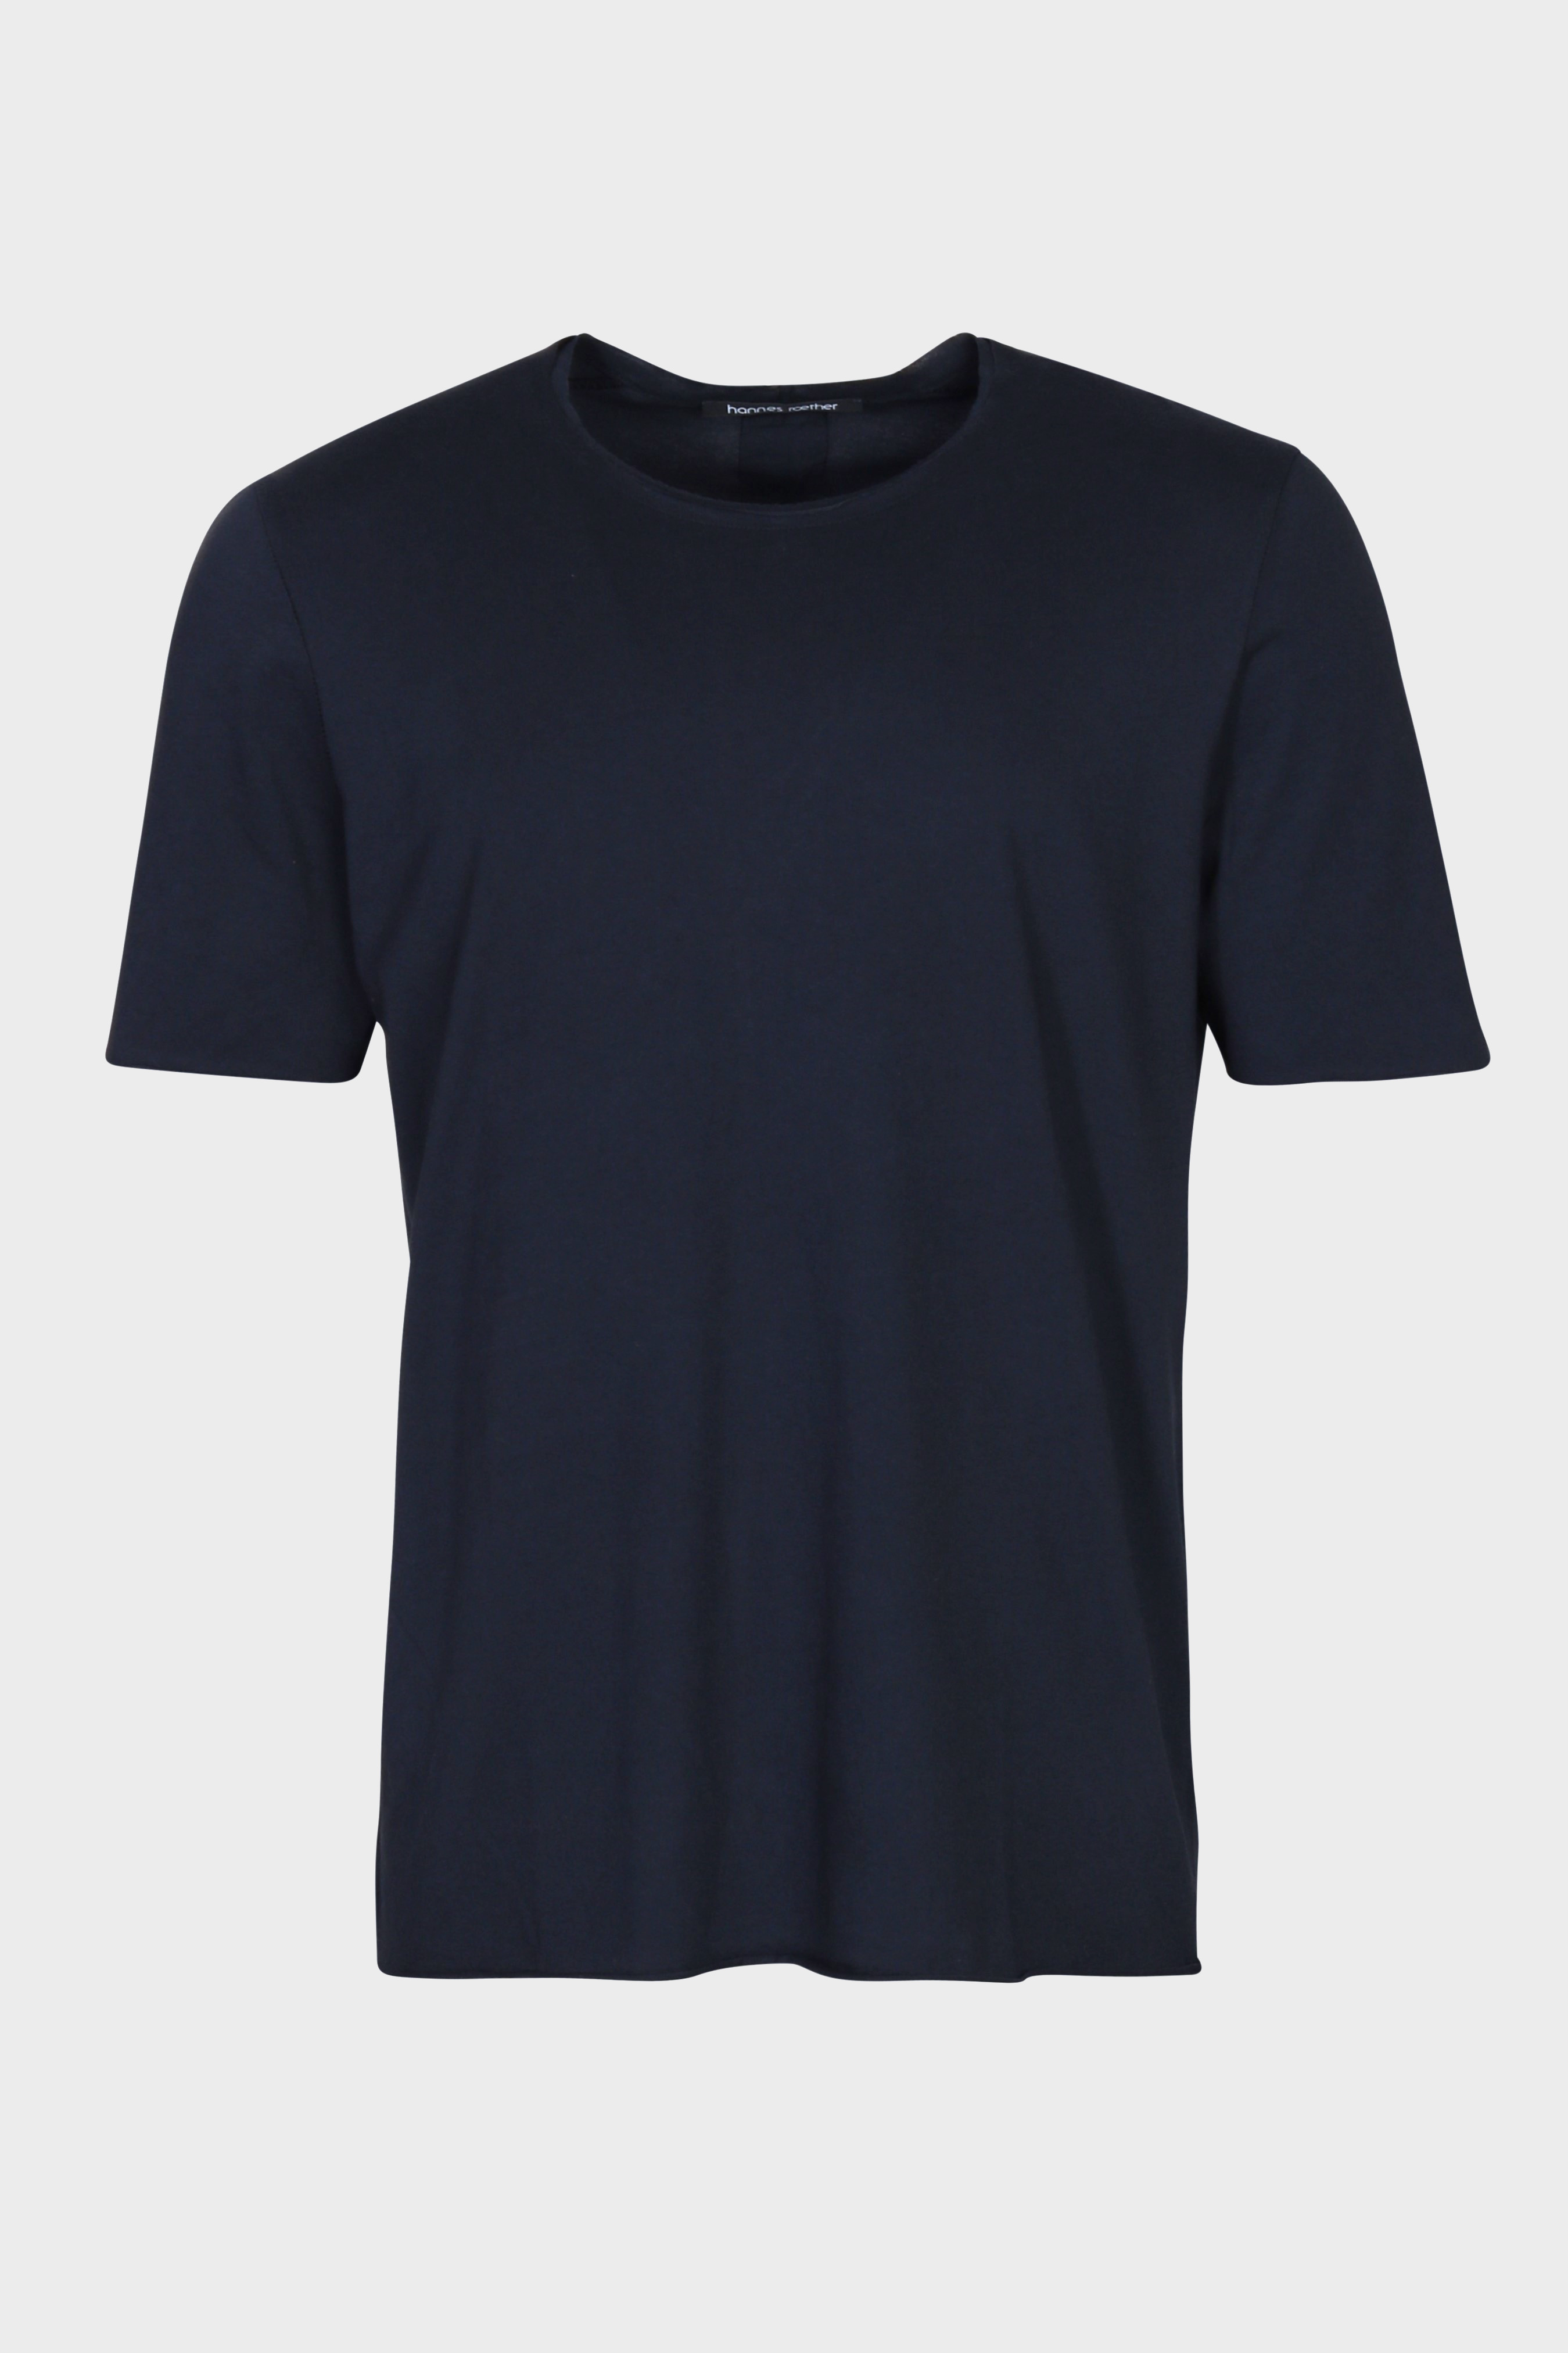 HANNES ROETHER T-Shirt in Navy 3XL